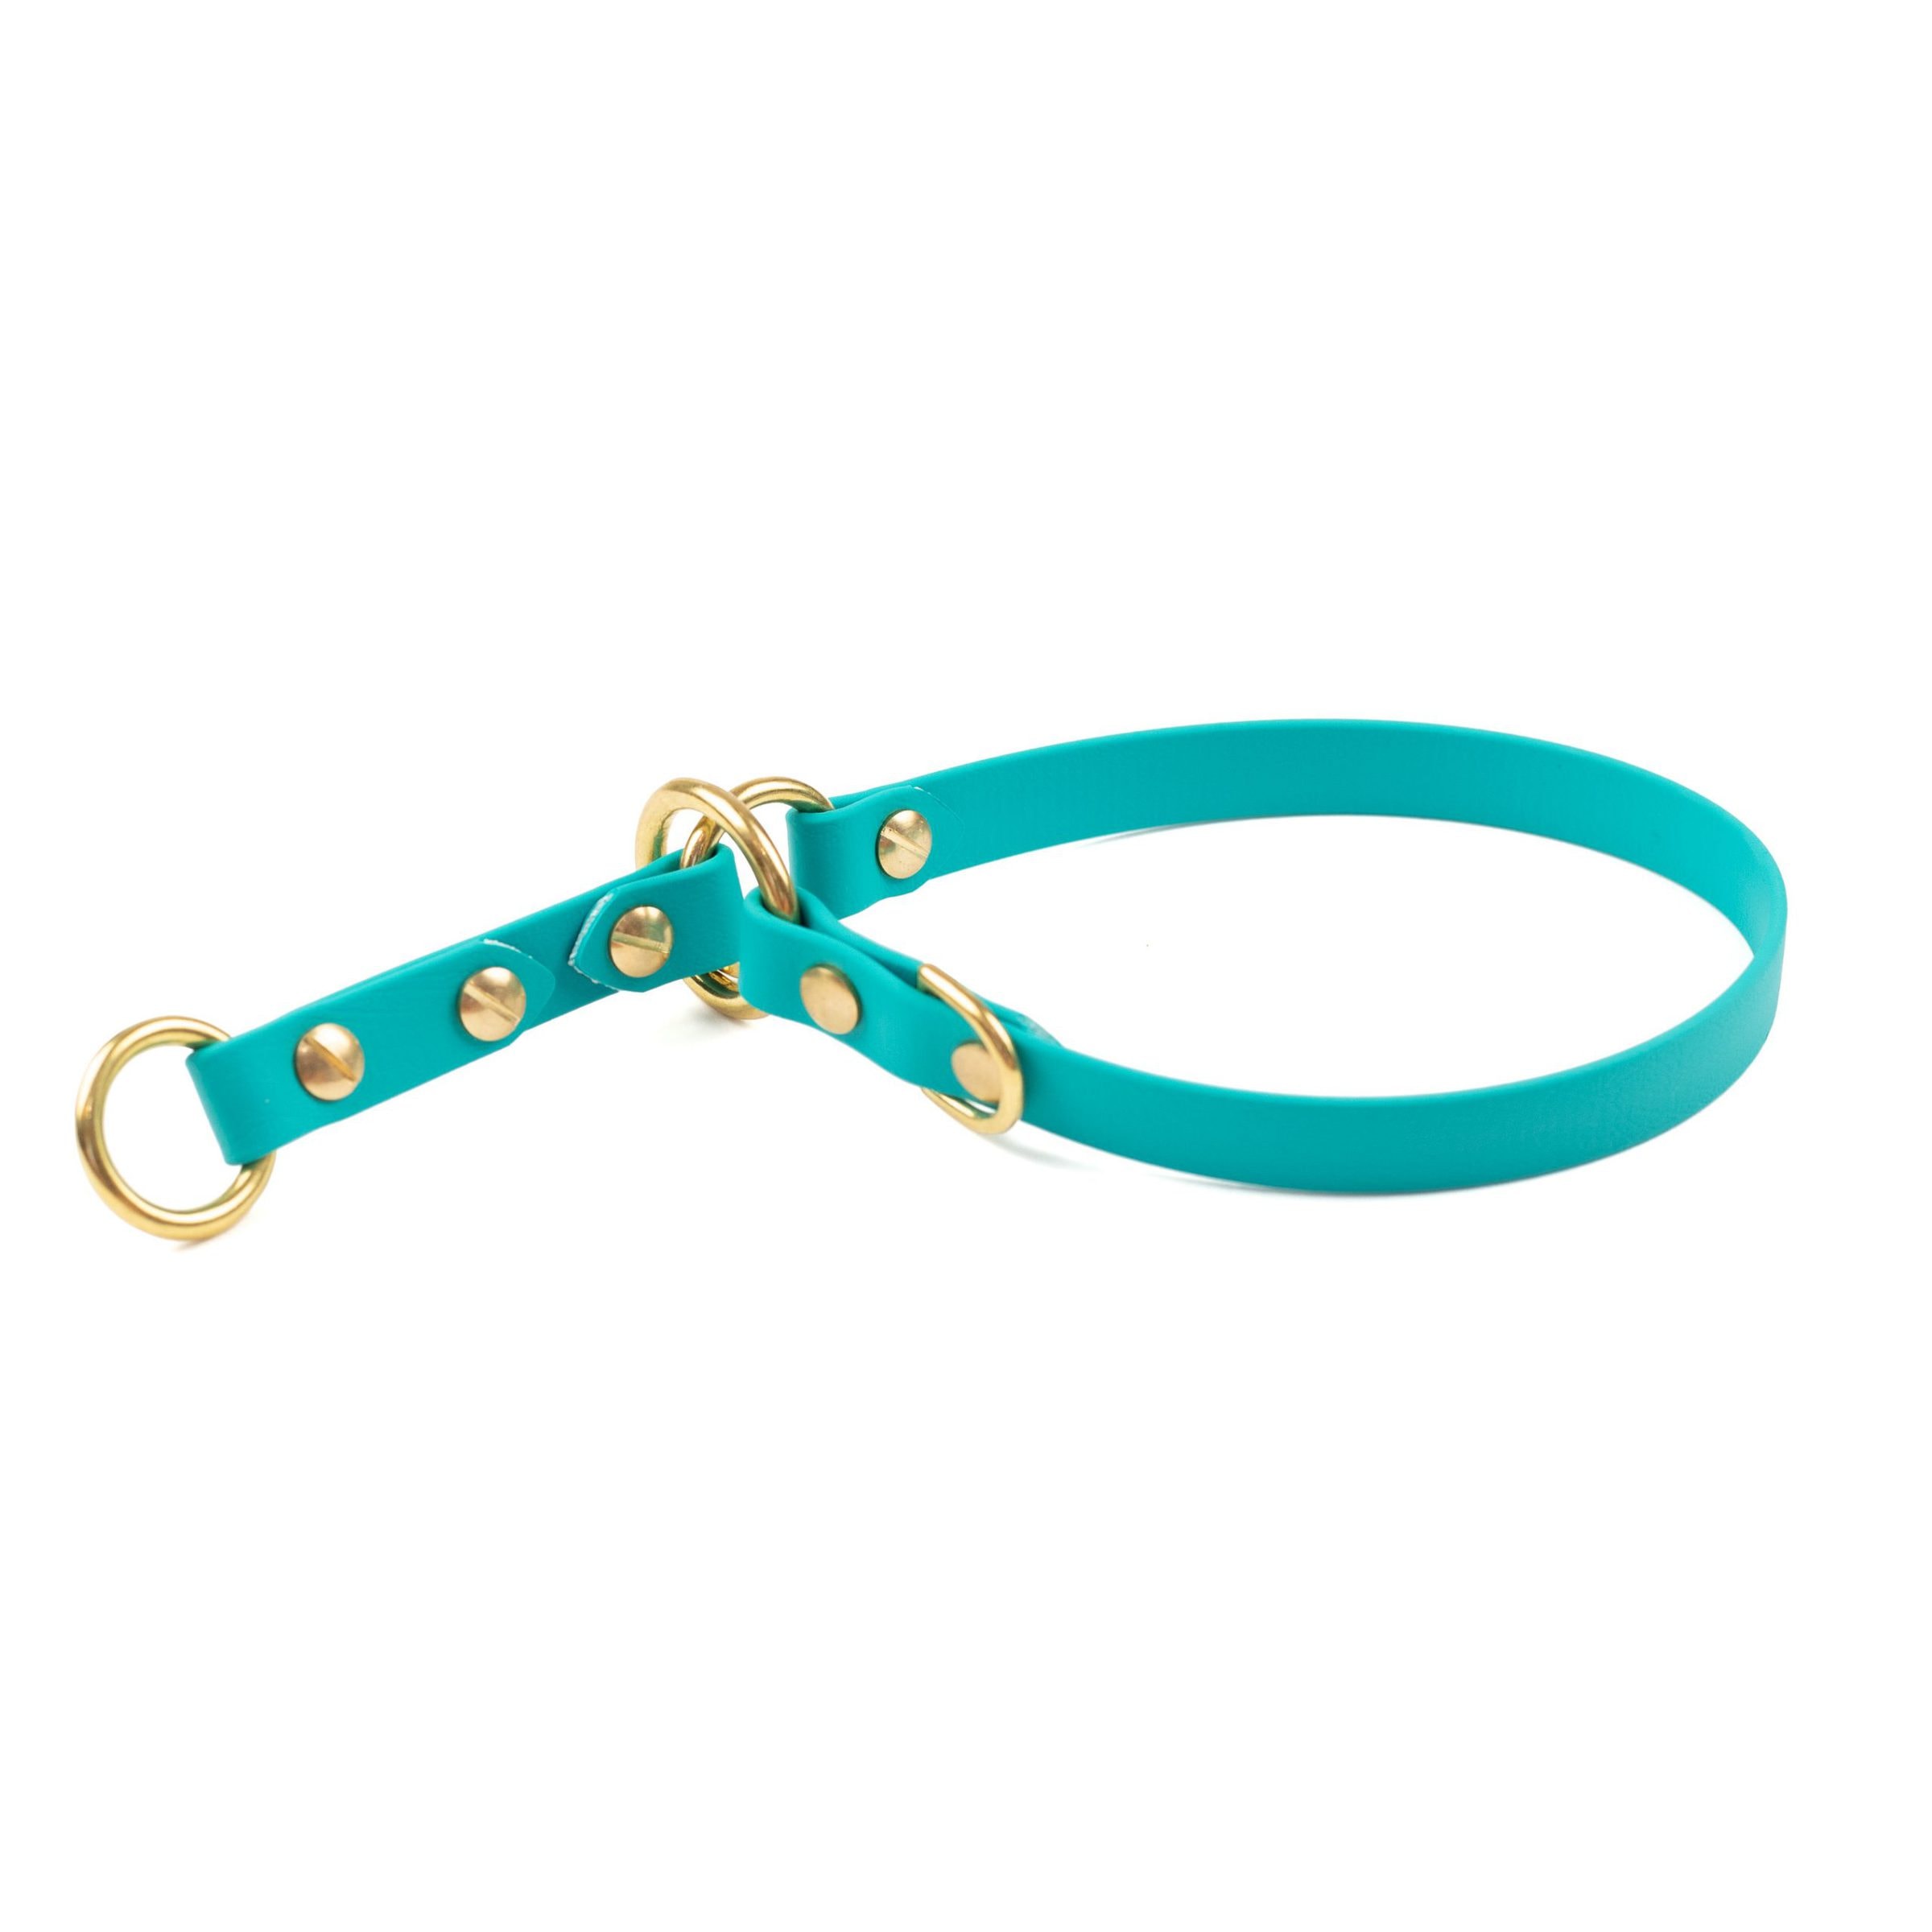 Teal and brass 5/8" o-ring limited slip collar